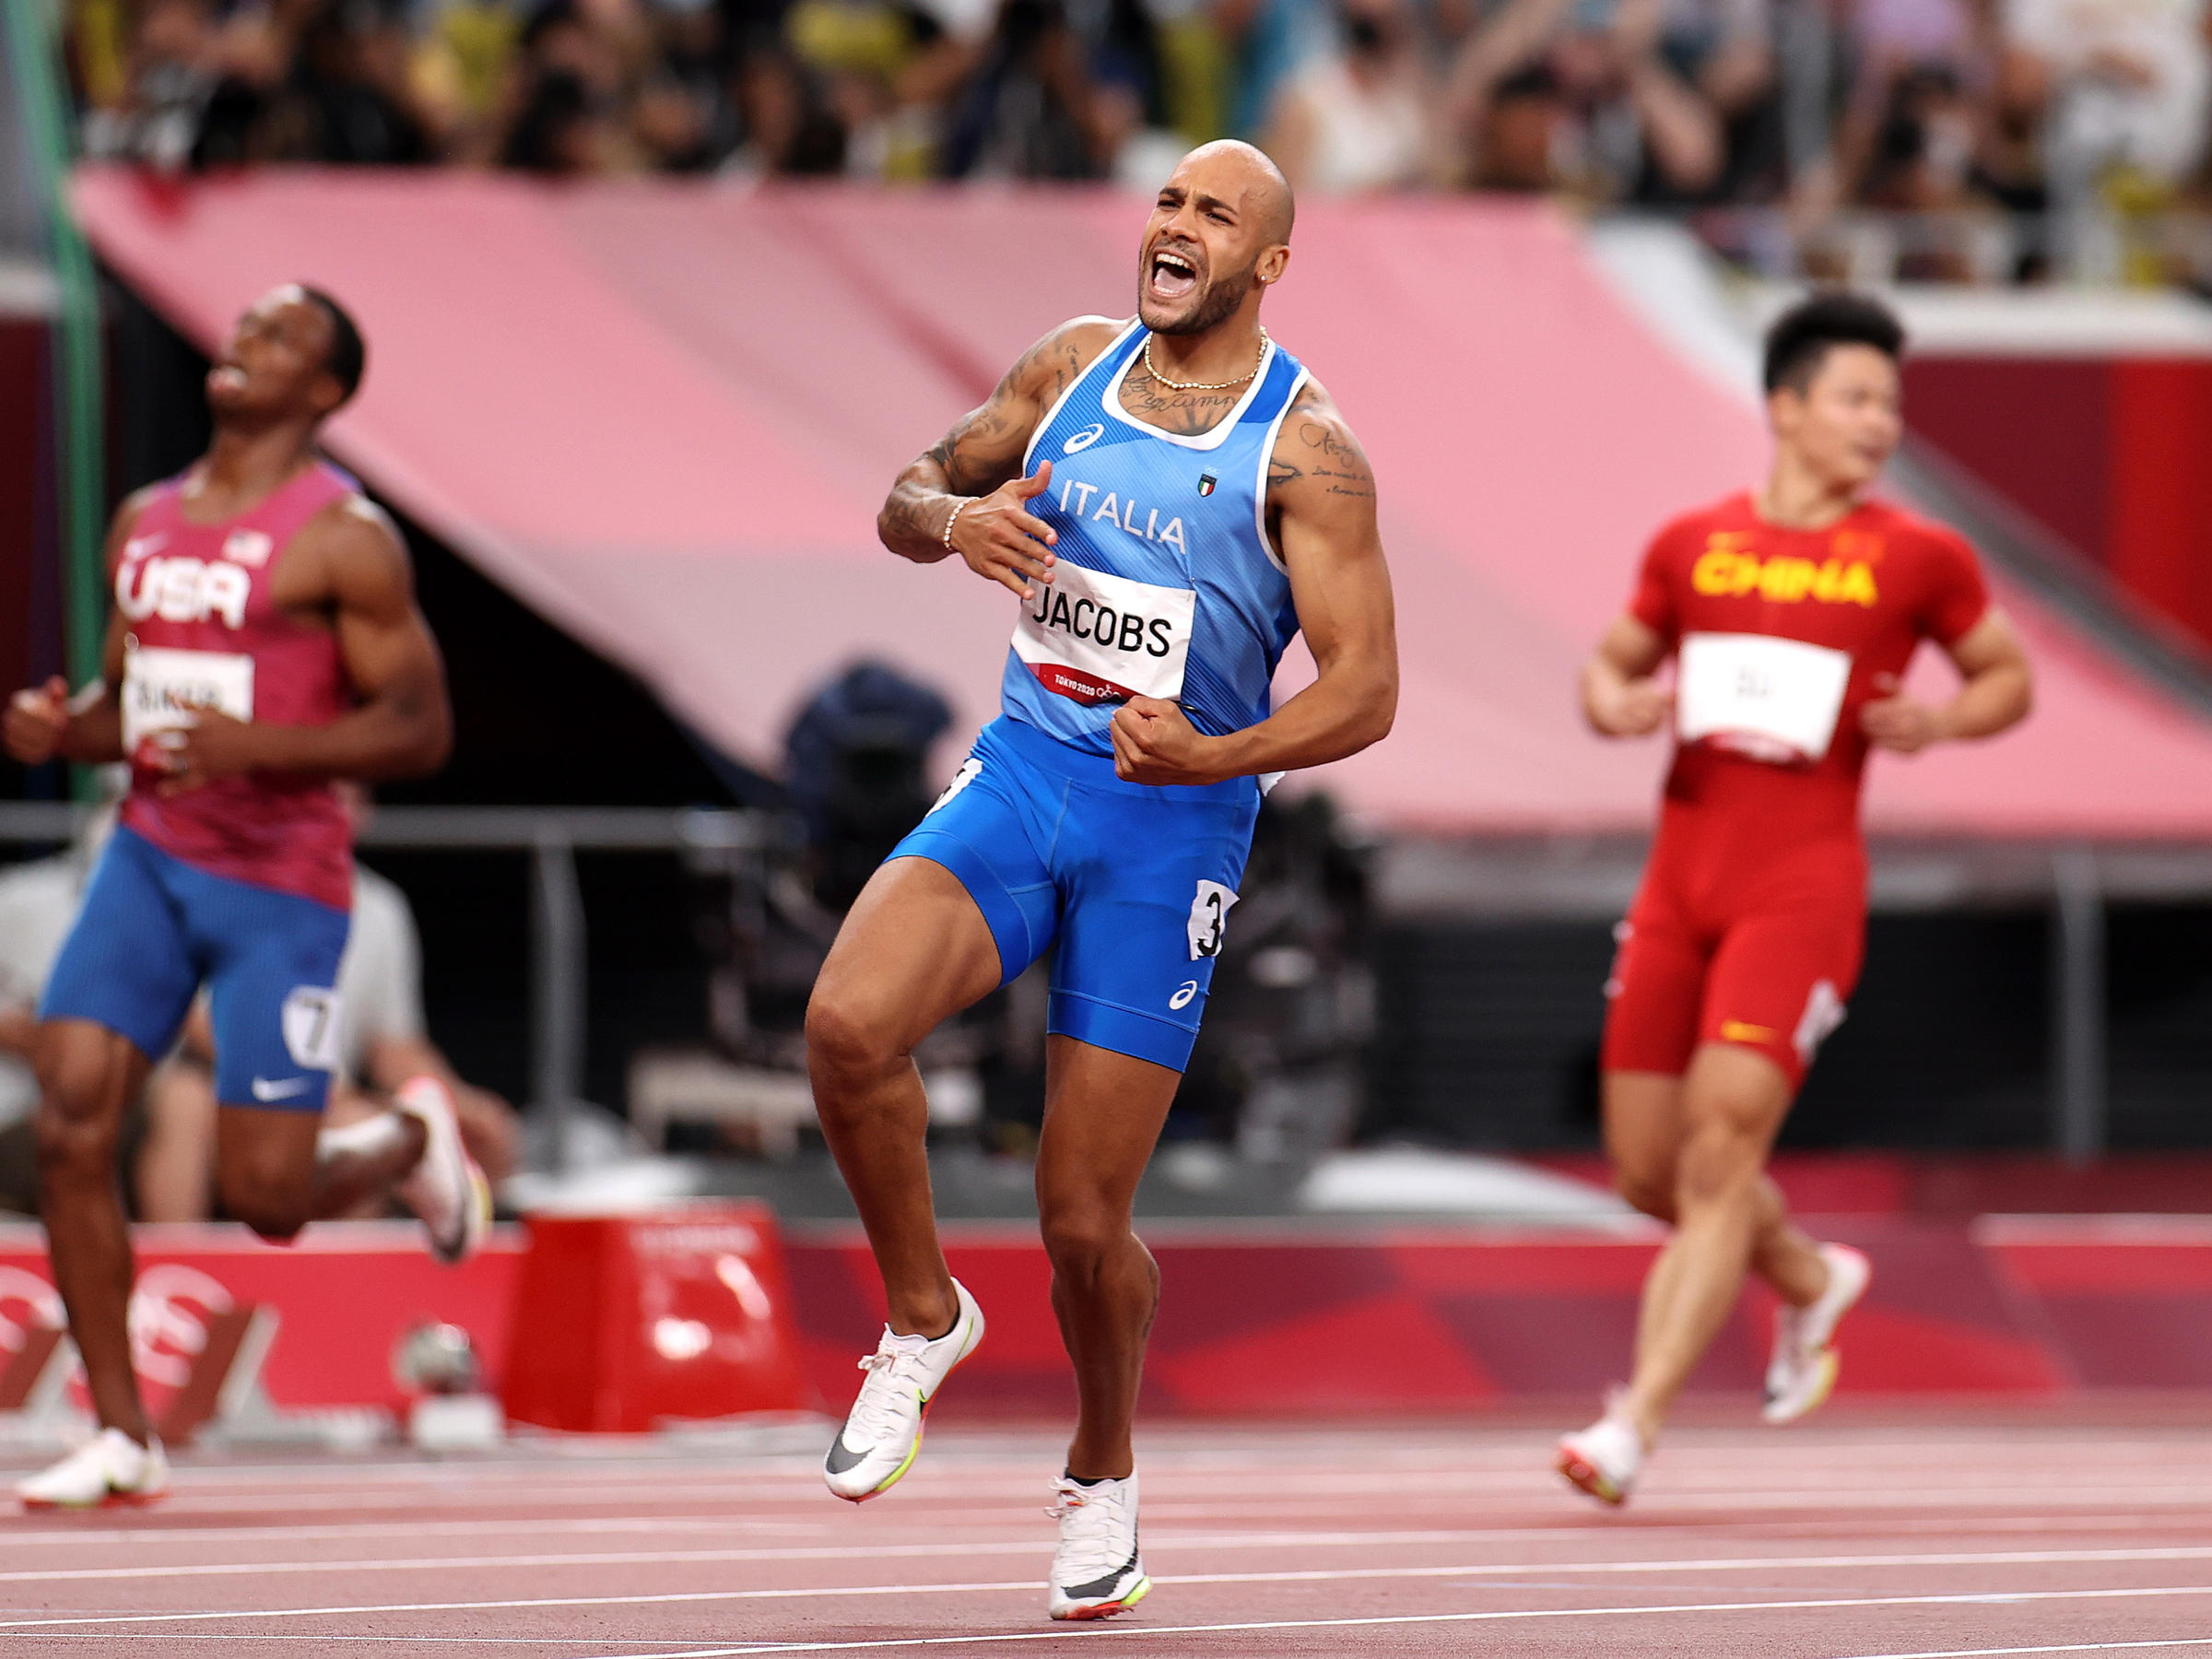 Marcell Jacobs Wins The Men's 100 Meter, Inheriting The Crown From